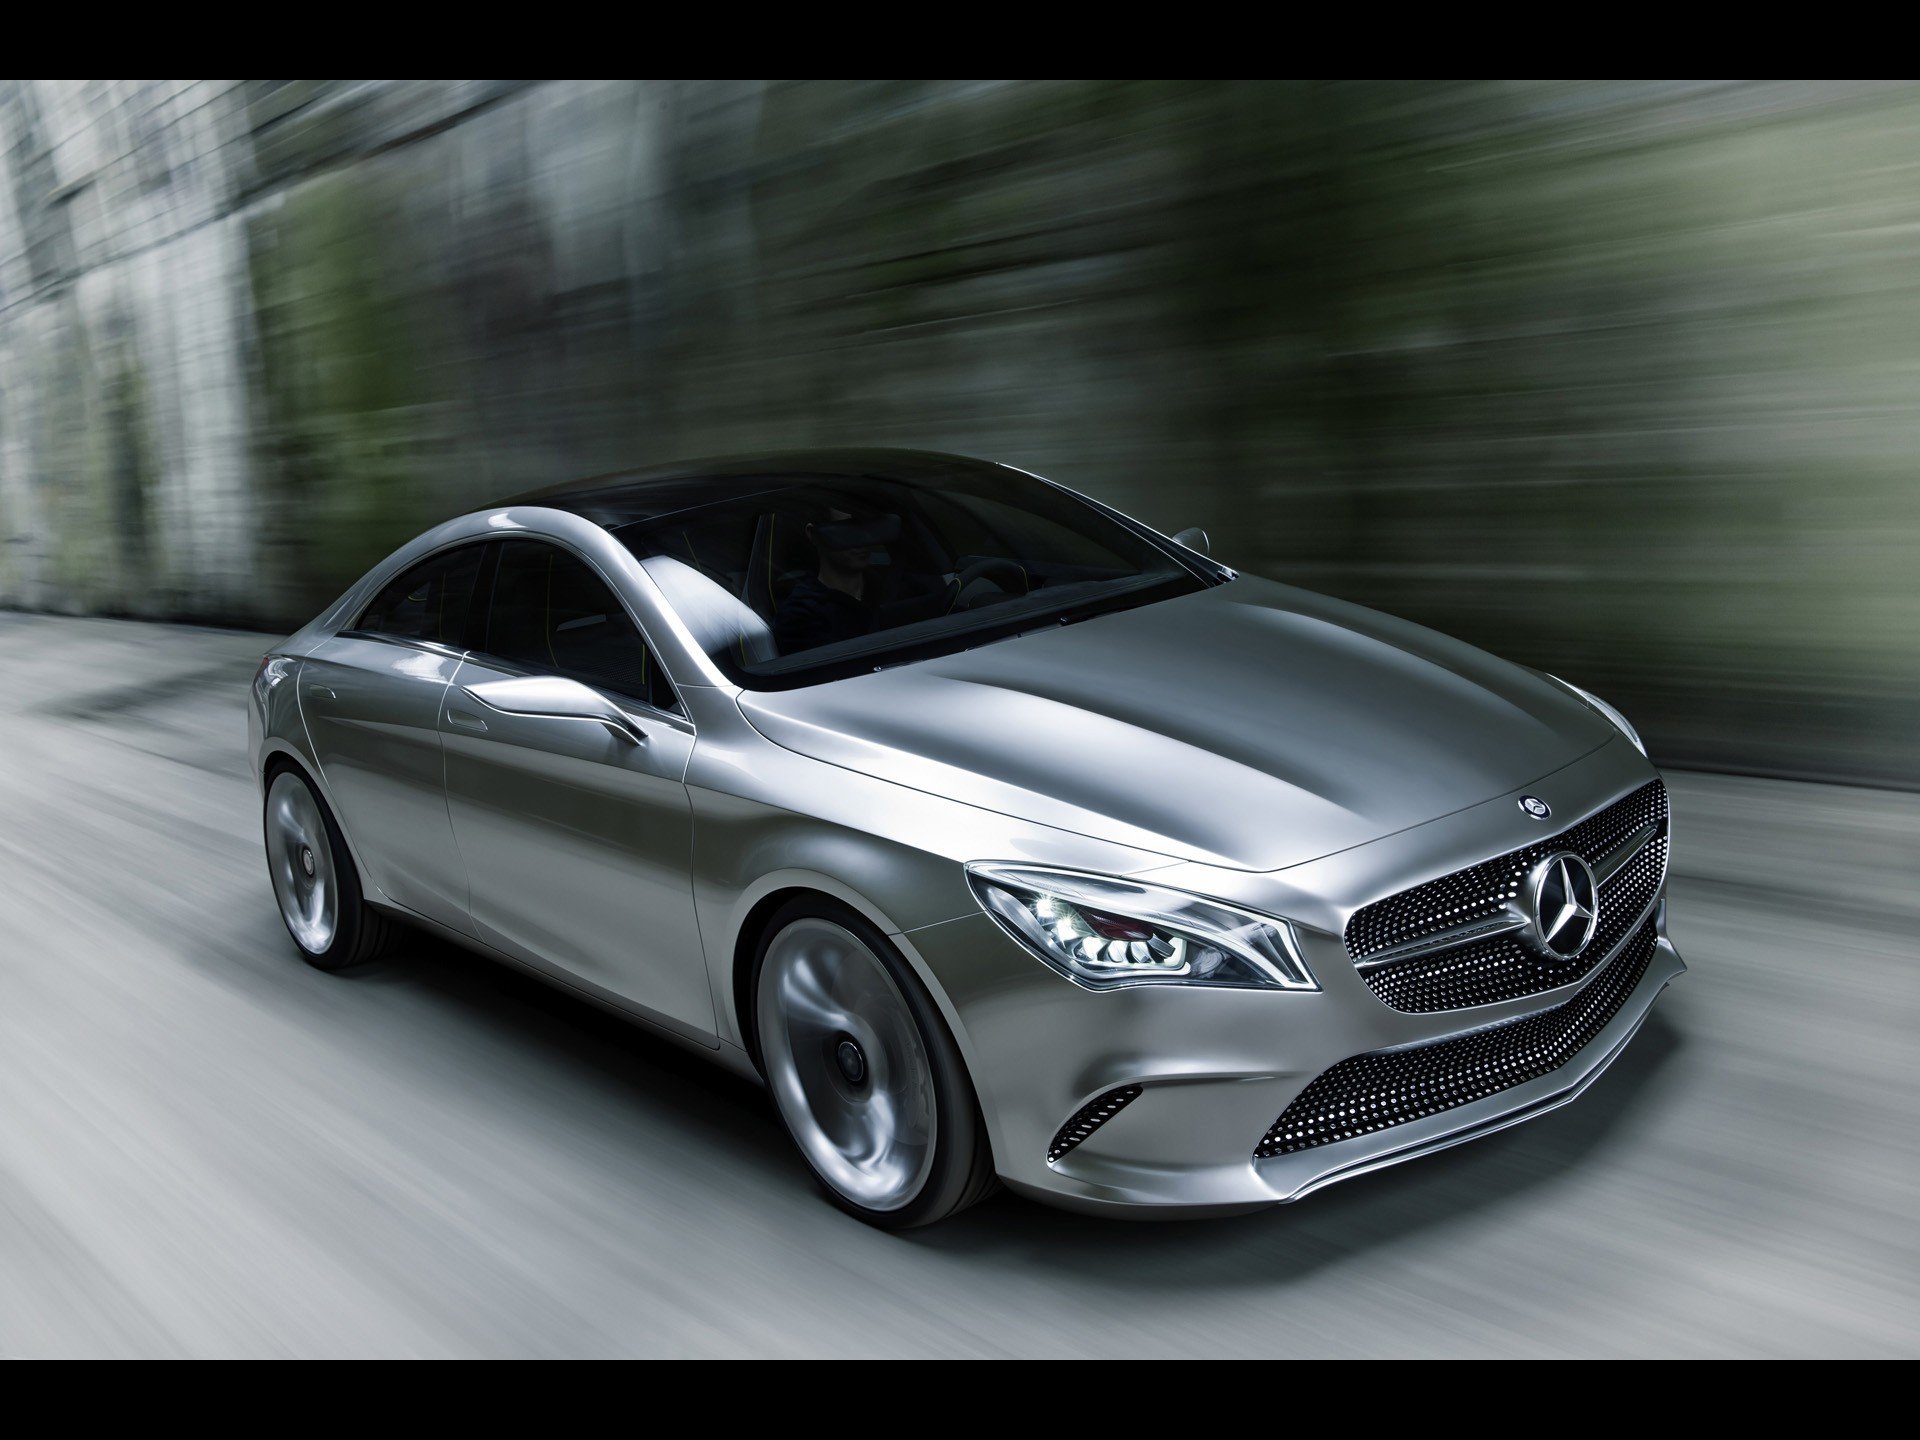 cars, Concept, Cars, Motion, Mercedes benz, Style, Coupe Wallpaper